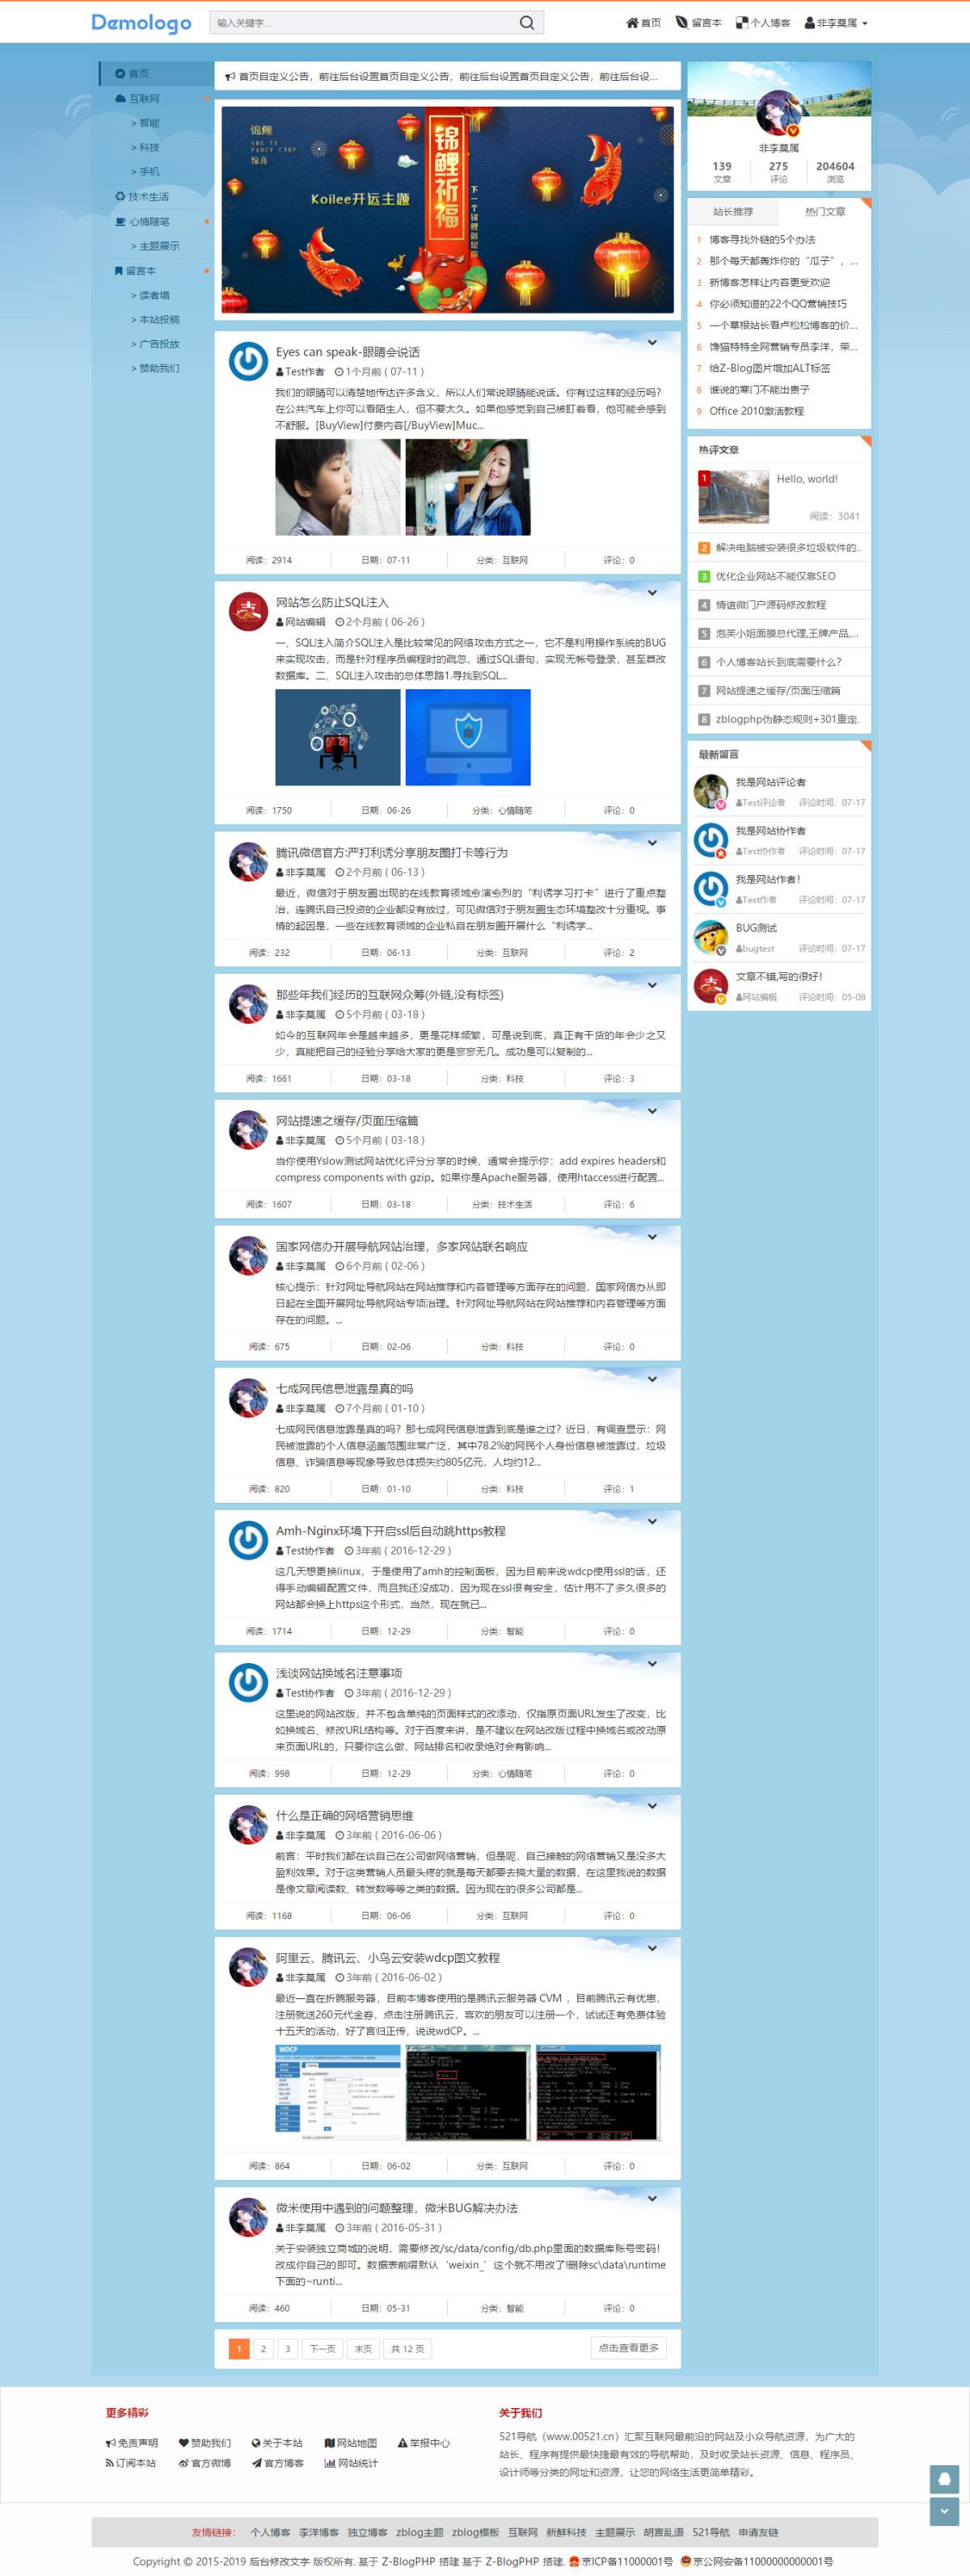  The preferred microblog show template for personal theme website building, imitating the 17th page of Sina Weibo official website